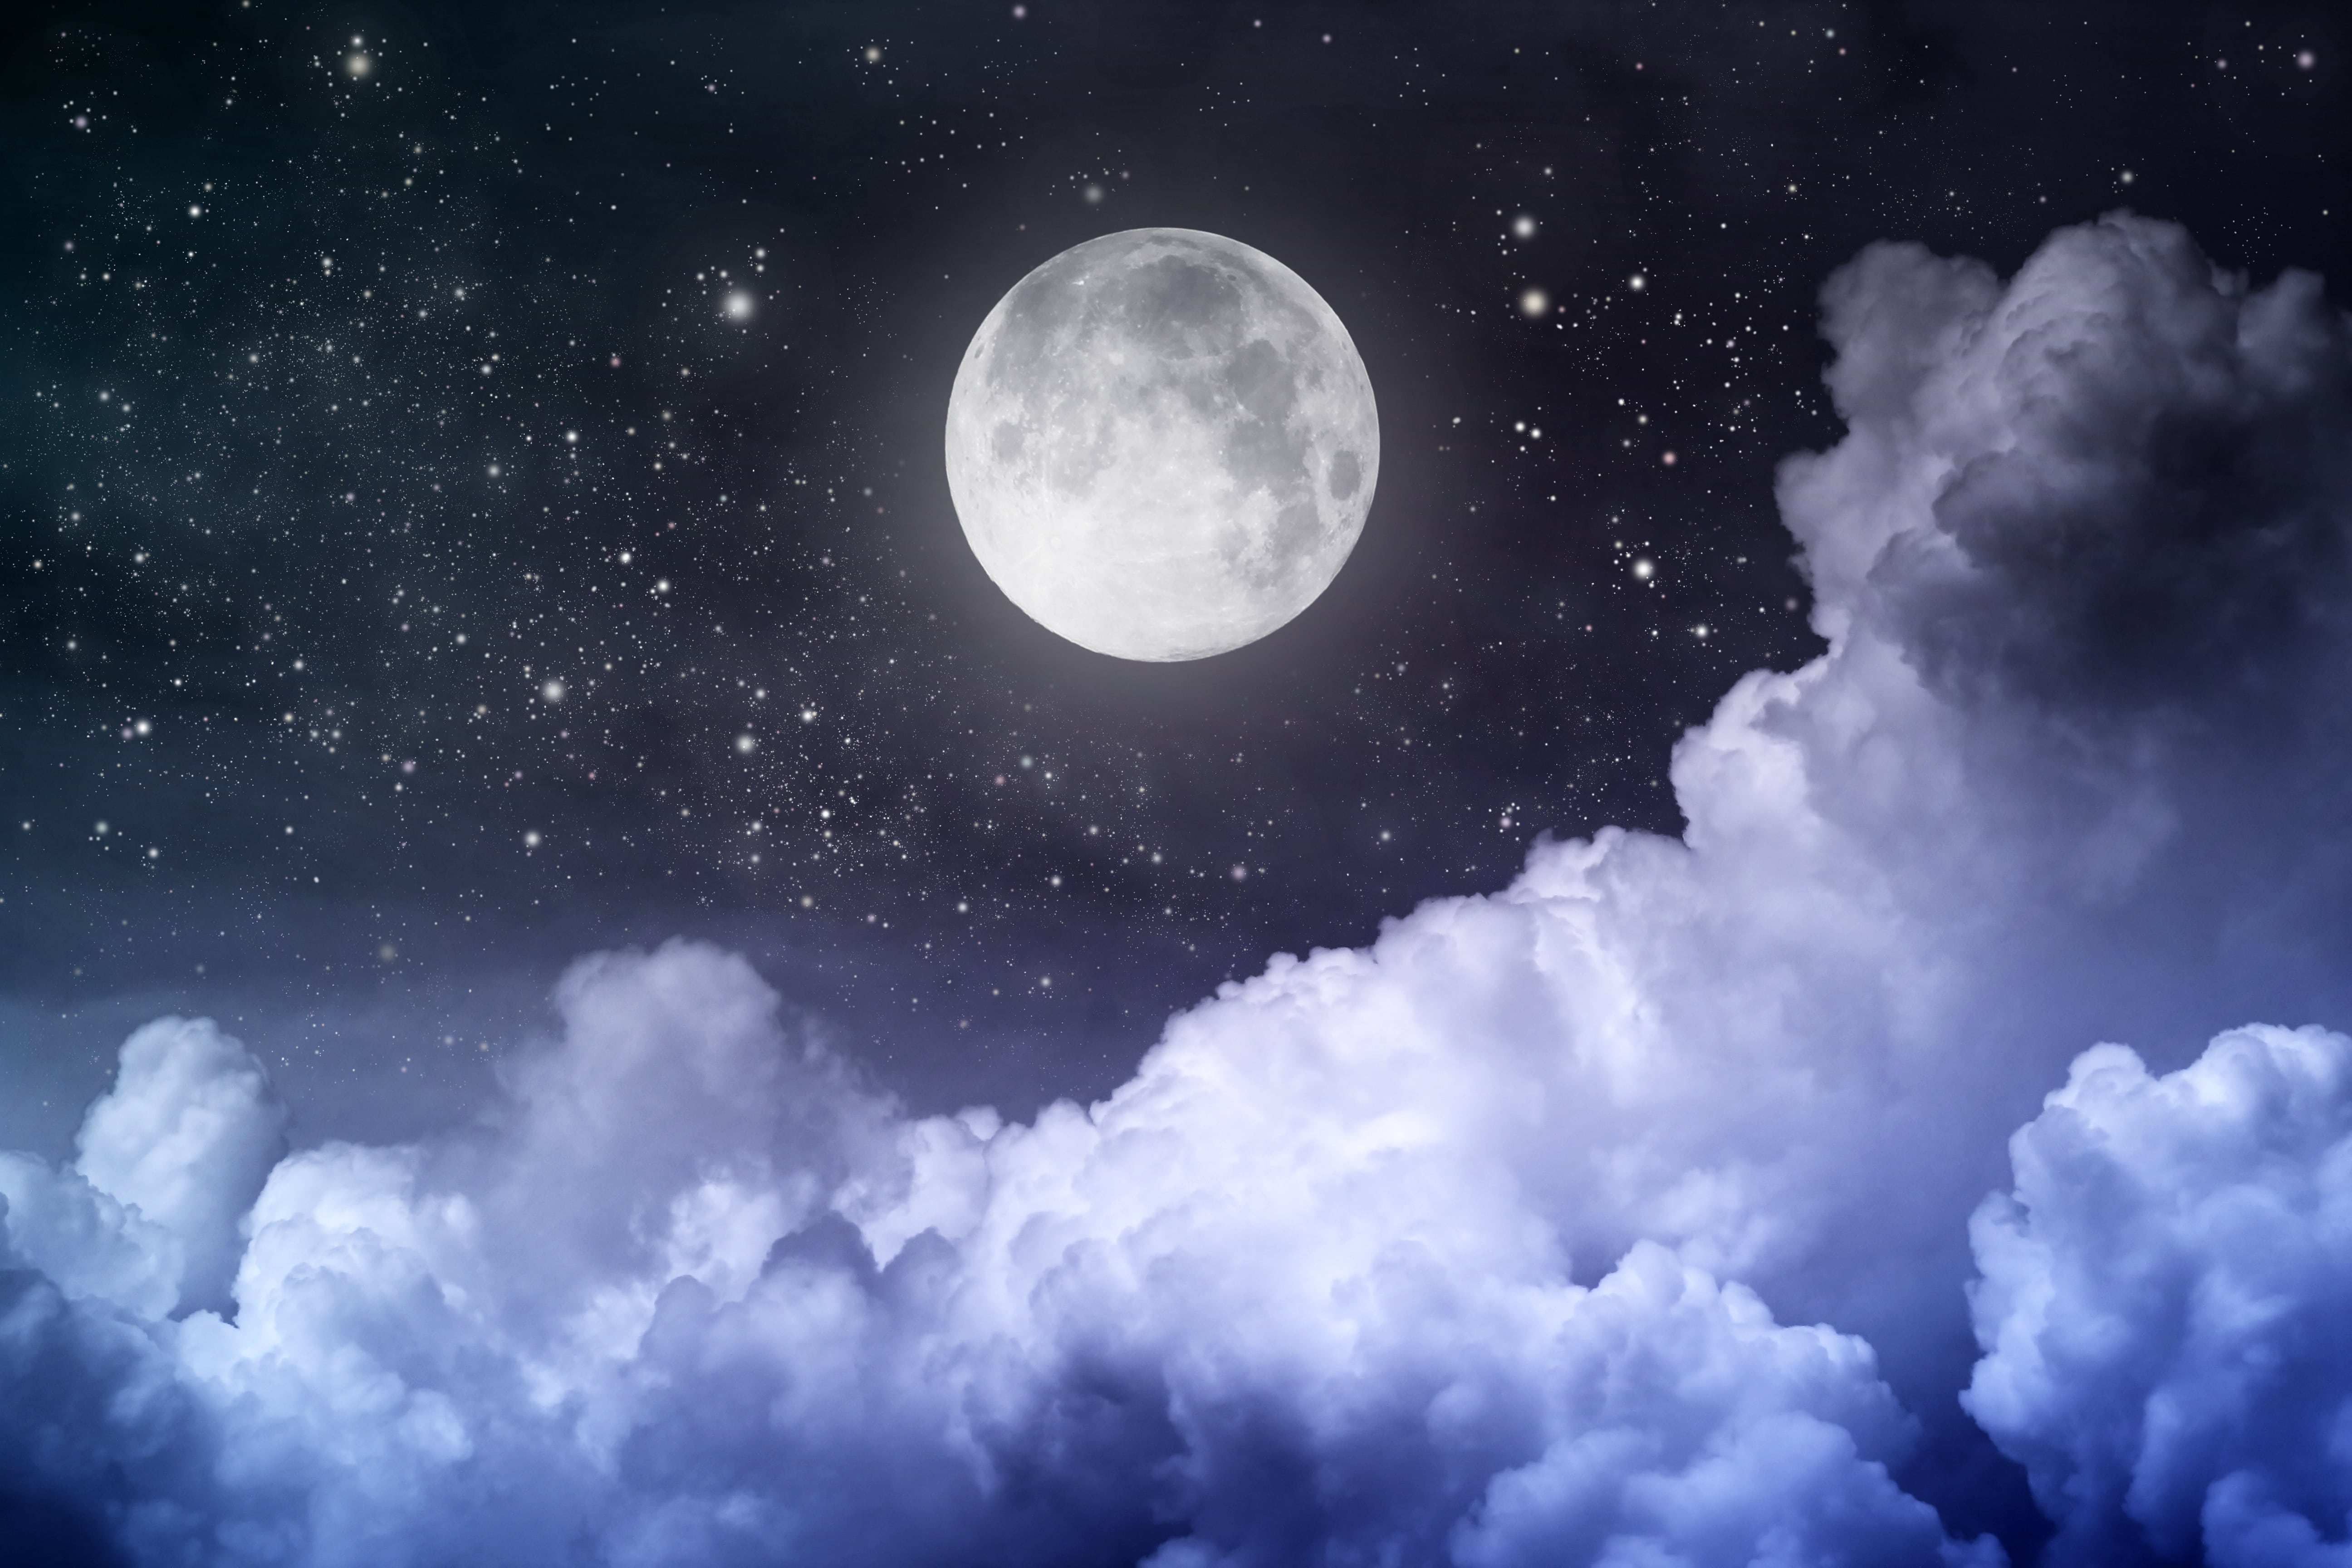 Does mysterious full moon affect...